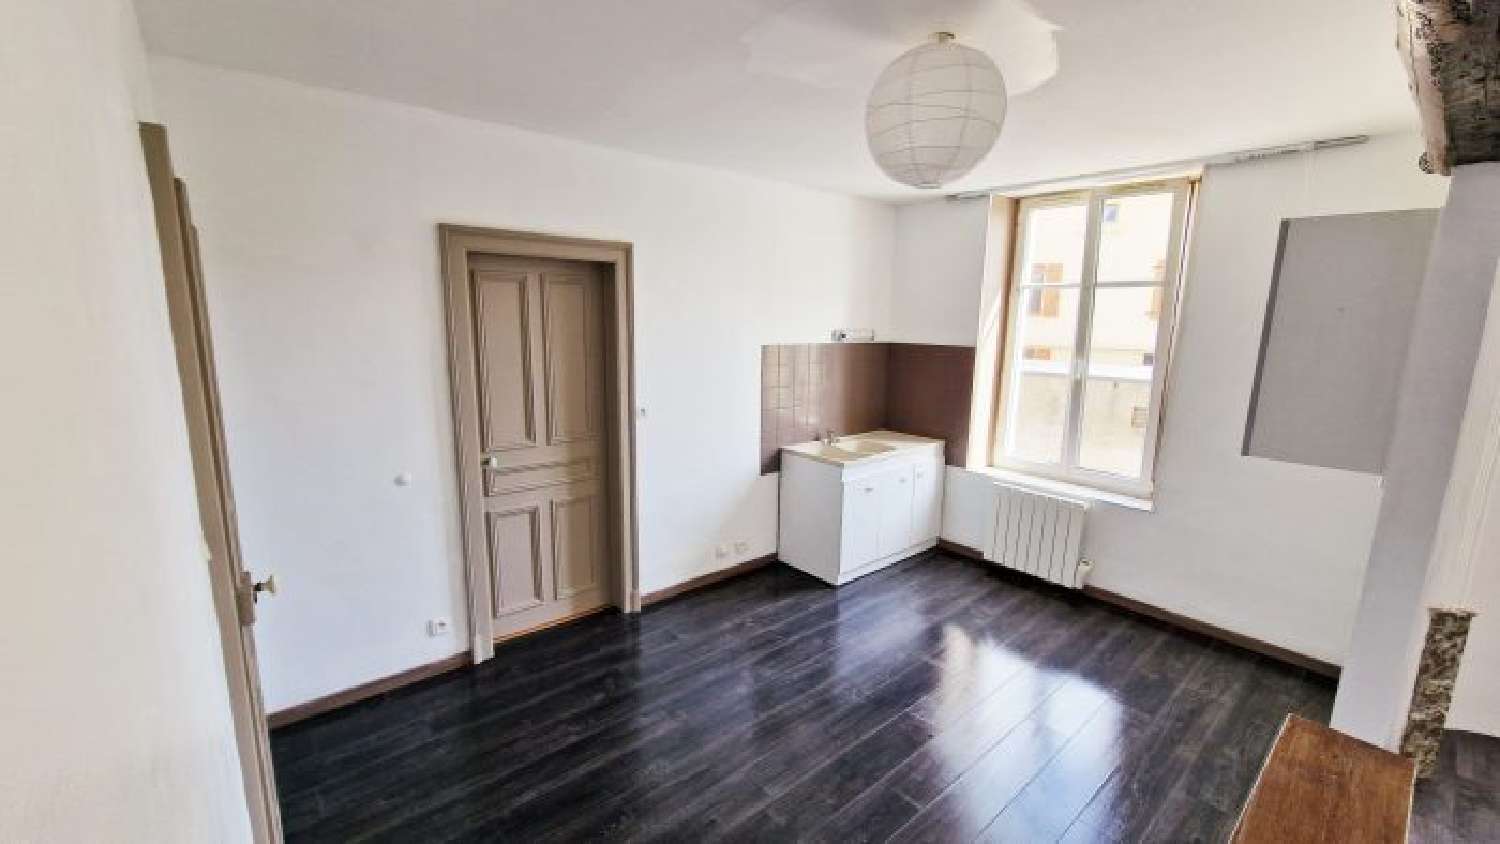  te koop appartement Pagny-sur-Moselle Meurthe-et-Moselle 5